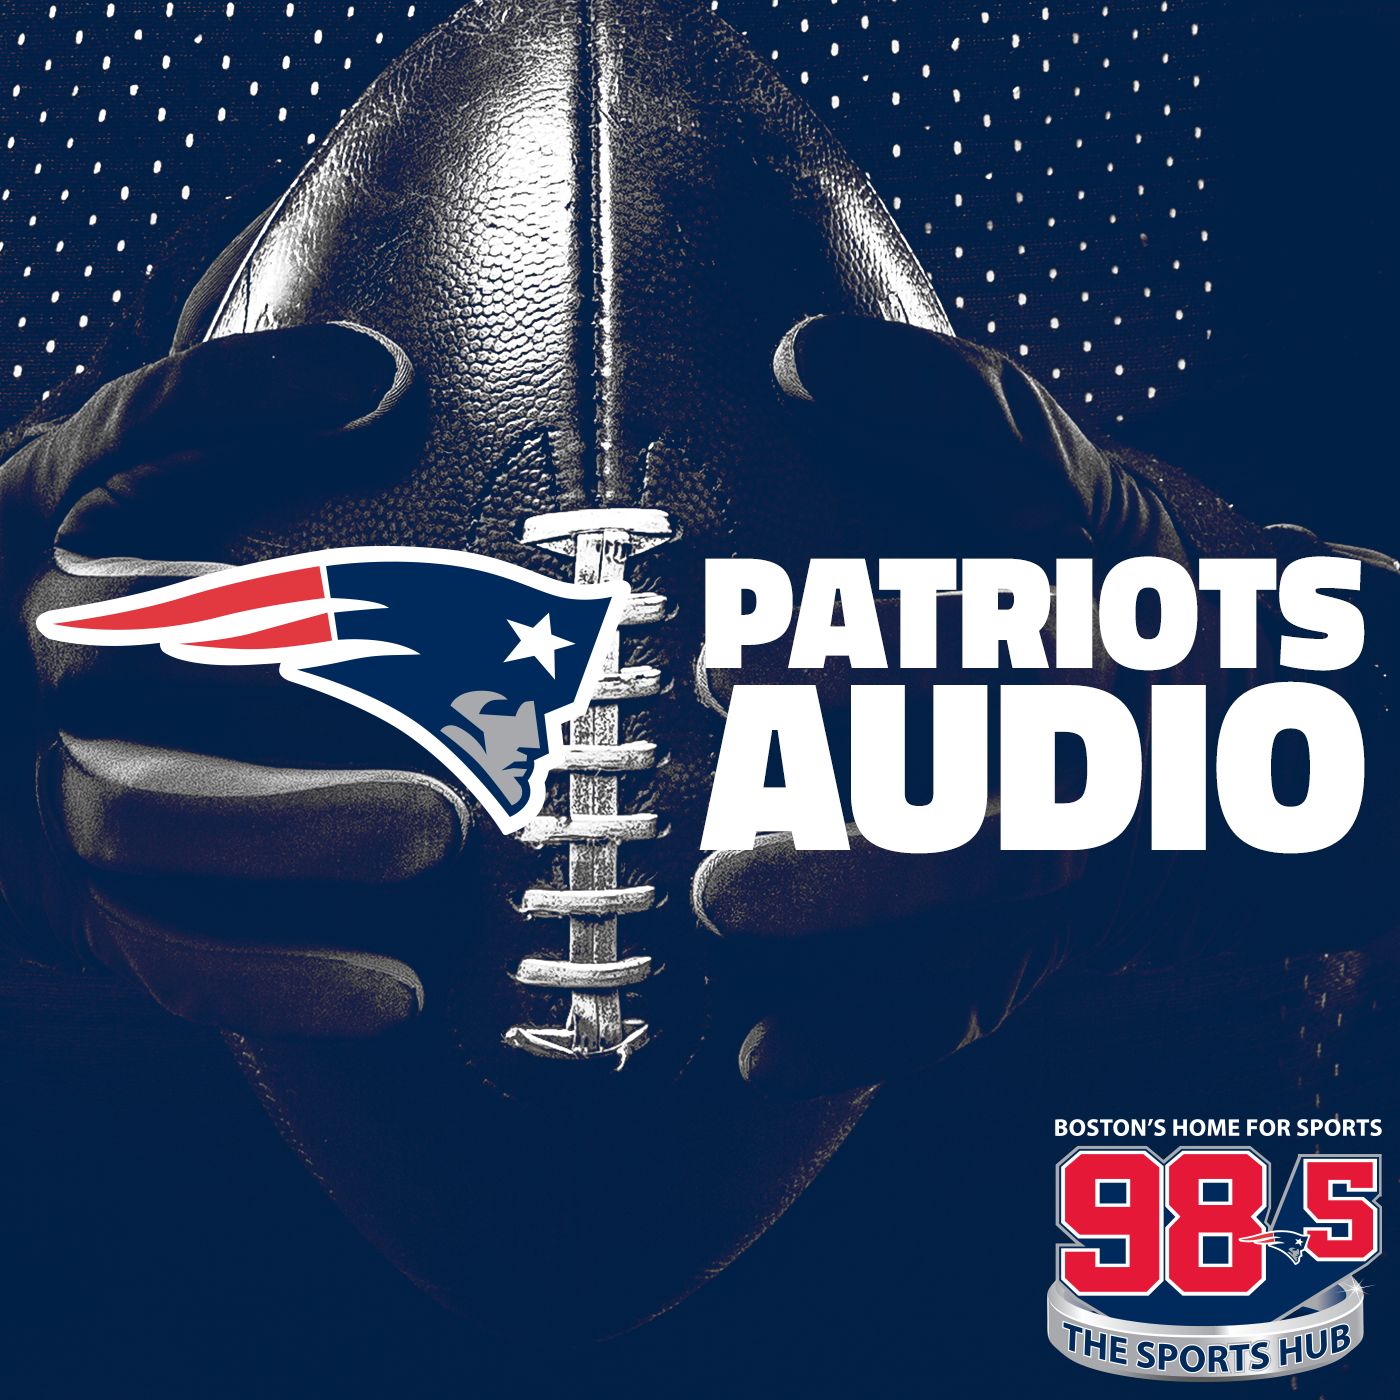 Greg Bedard Joins Patriots Post-Game After Loss To Dolphins